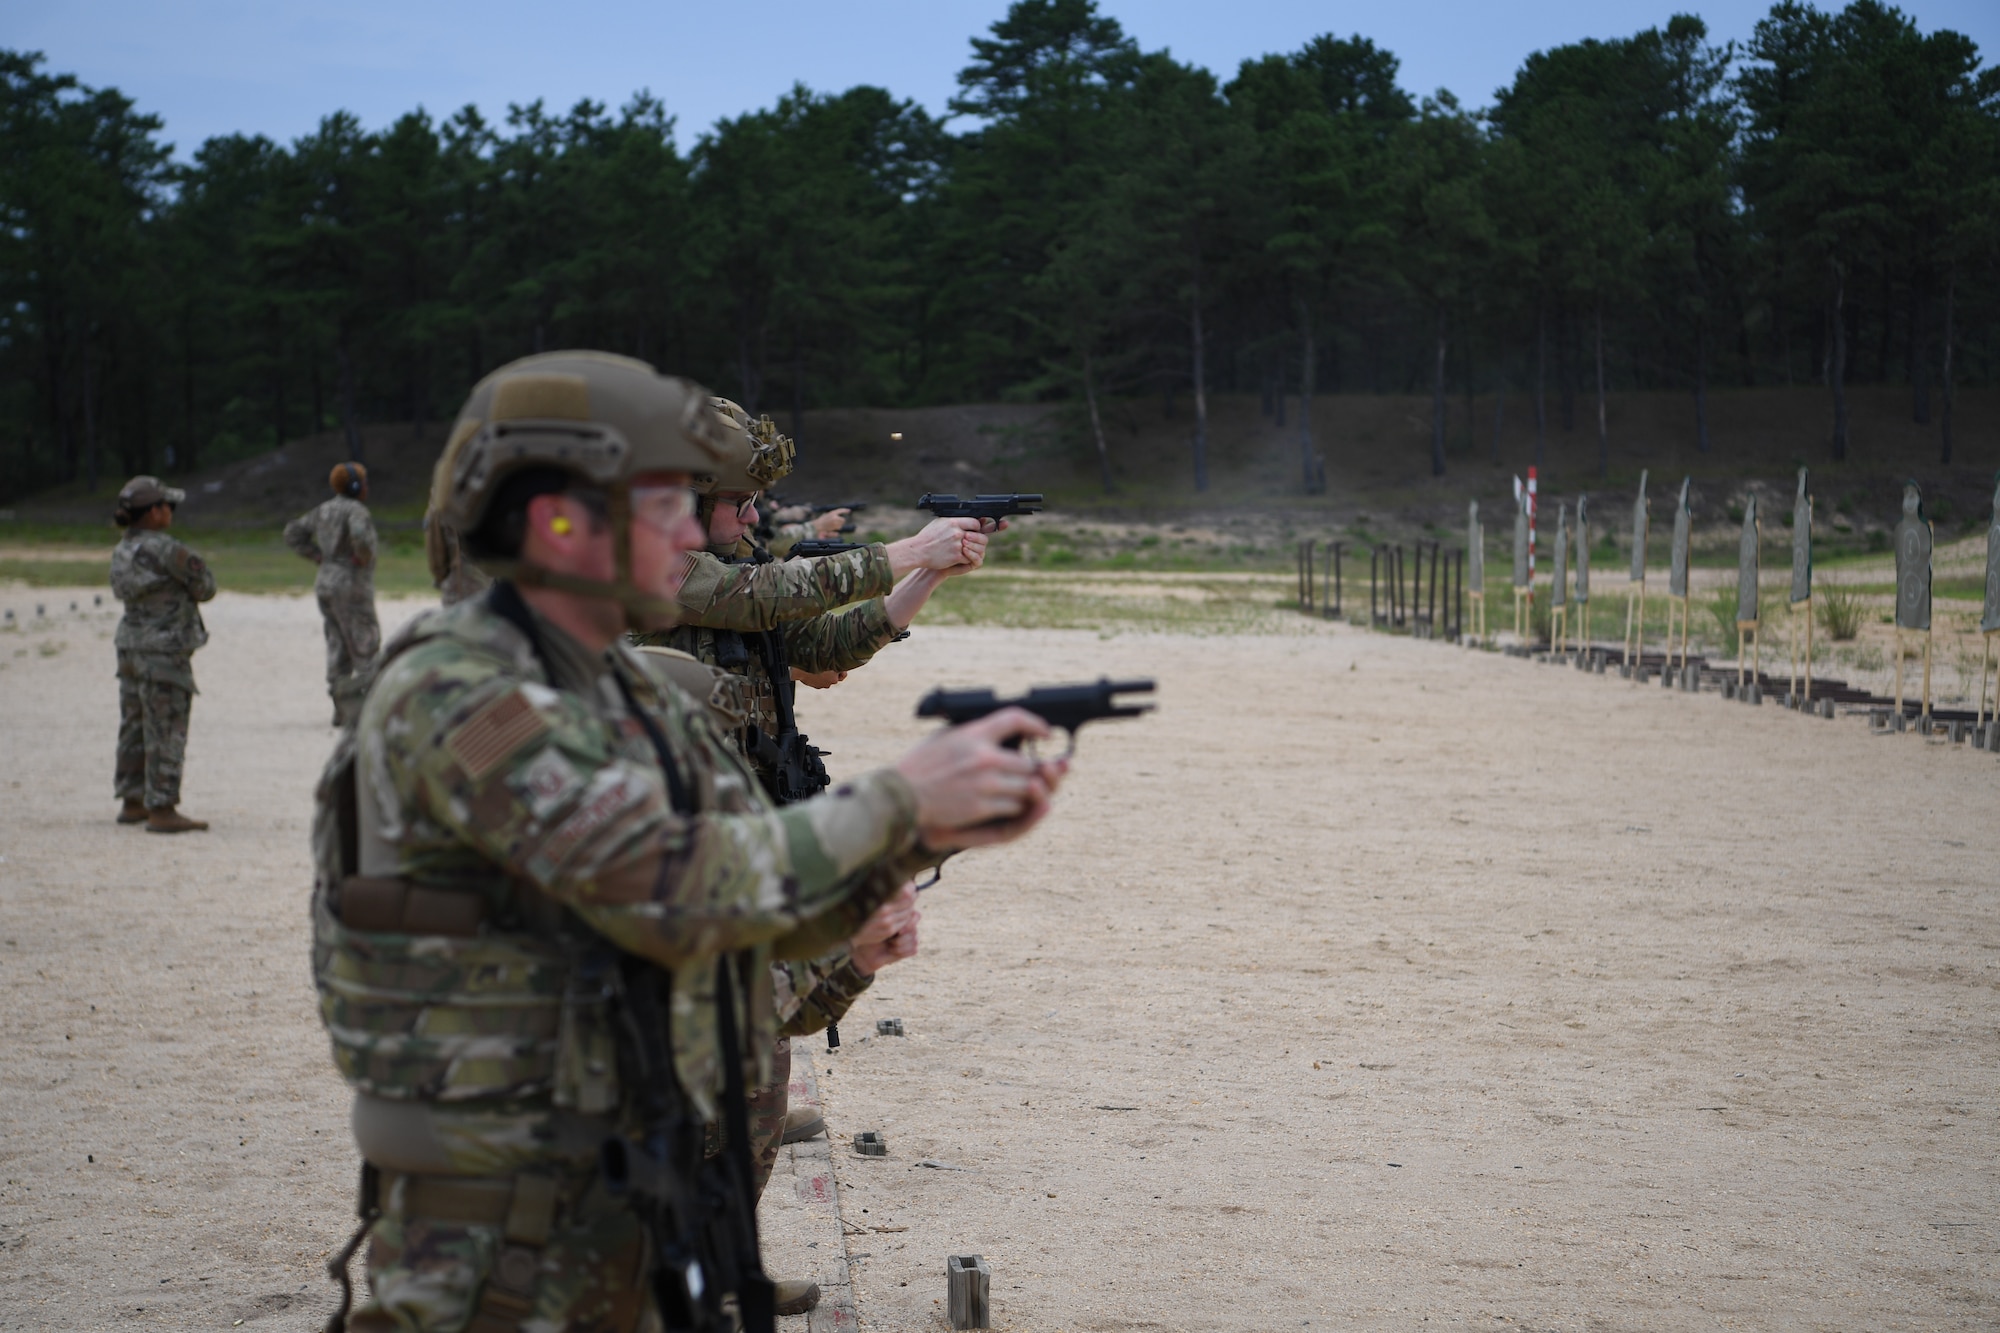 Airmen from the 621st Mobility Support Operations Squadron complete combat arms training at Joint Base McGuire-Dix-Lakehurst, New Jersey, July 22, 2020. The 621st MSOS Summit is mission-essential training held biannually to ensure full-spectrum readiness.